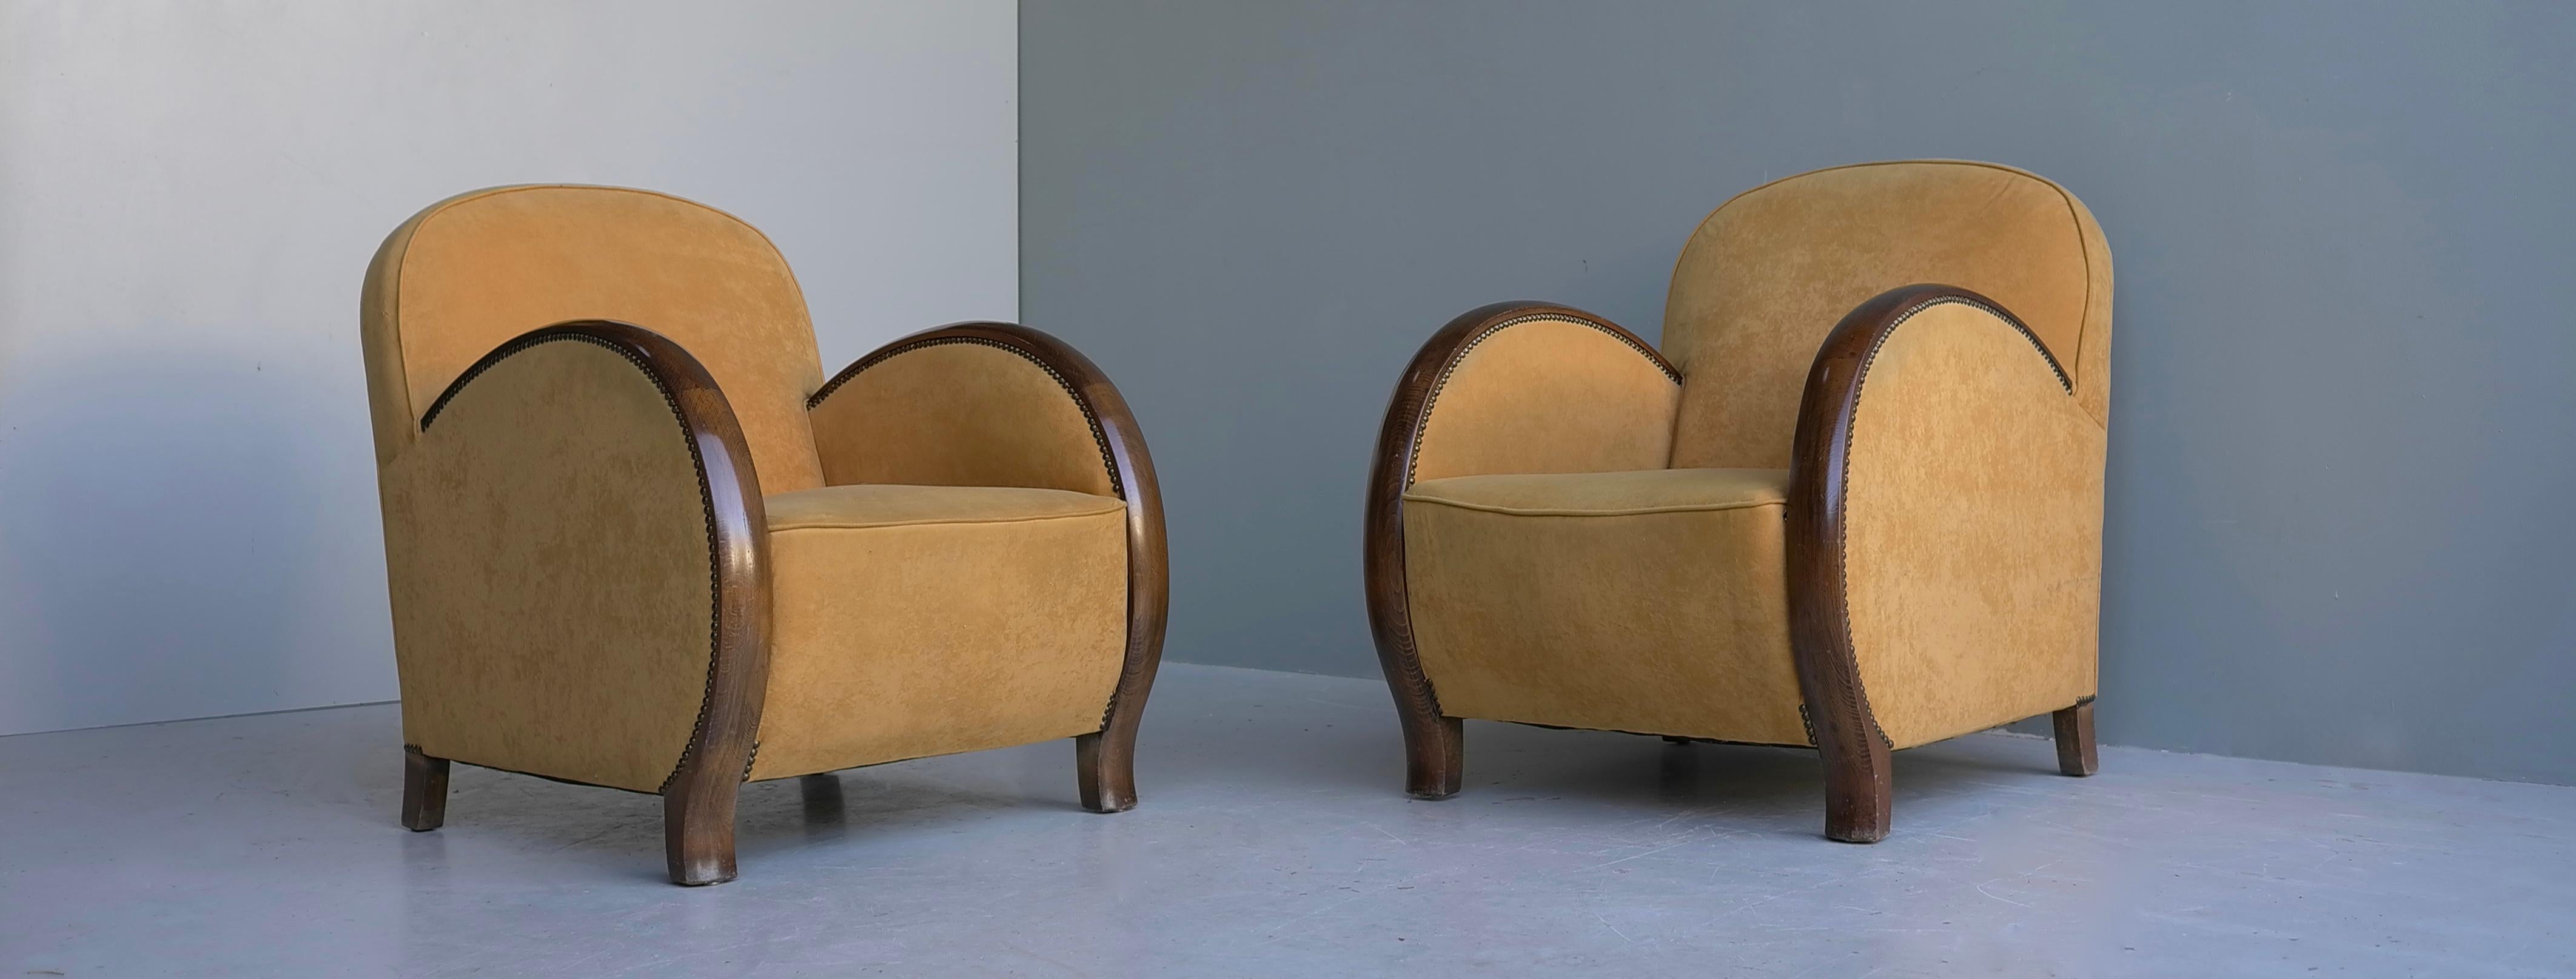 Pair of Art Deco Streamlined Armchairs in yellow Velvet with Wooden arms 1930's For Sale 2